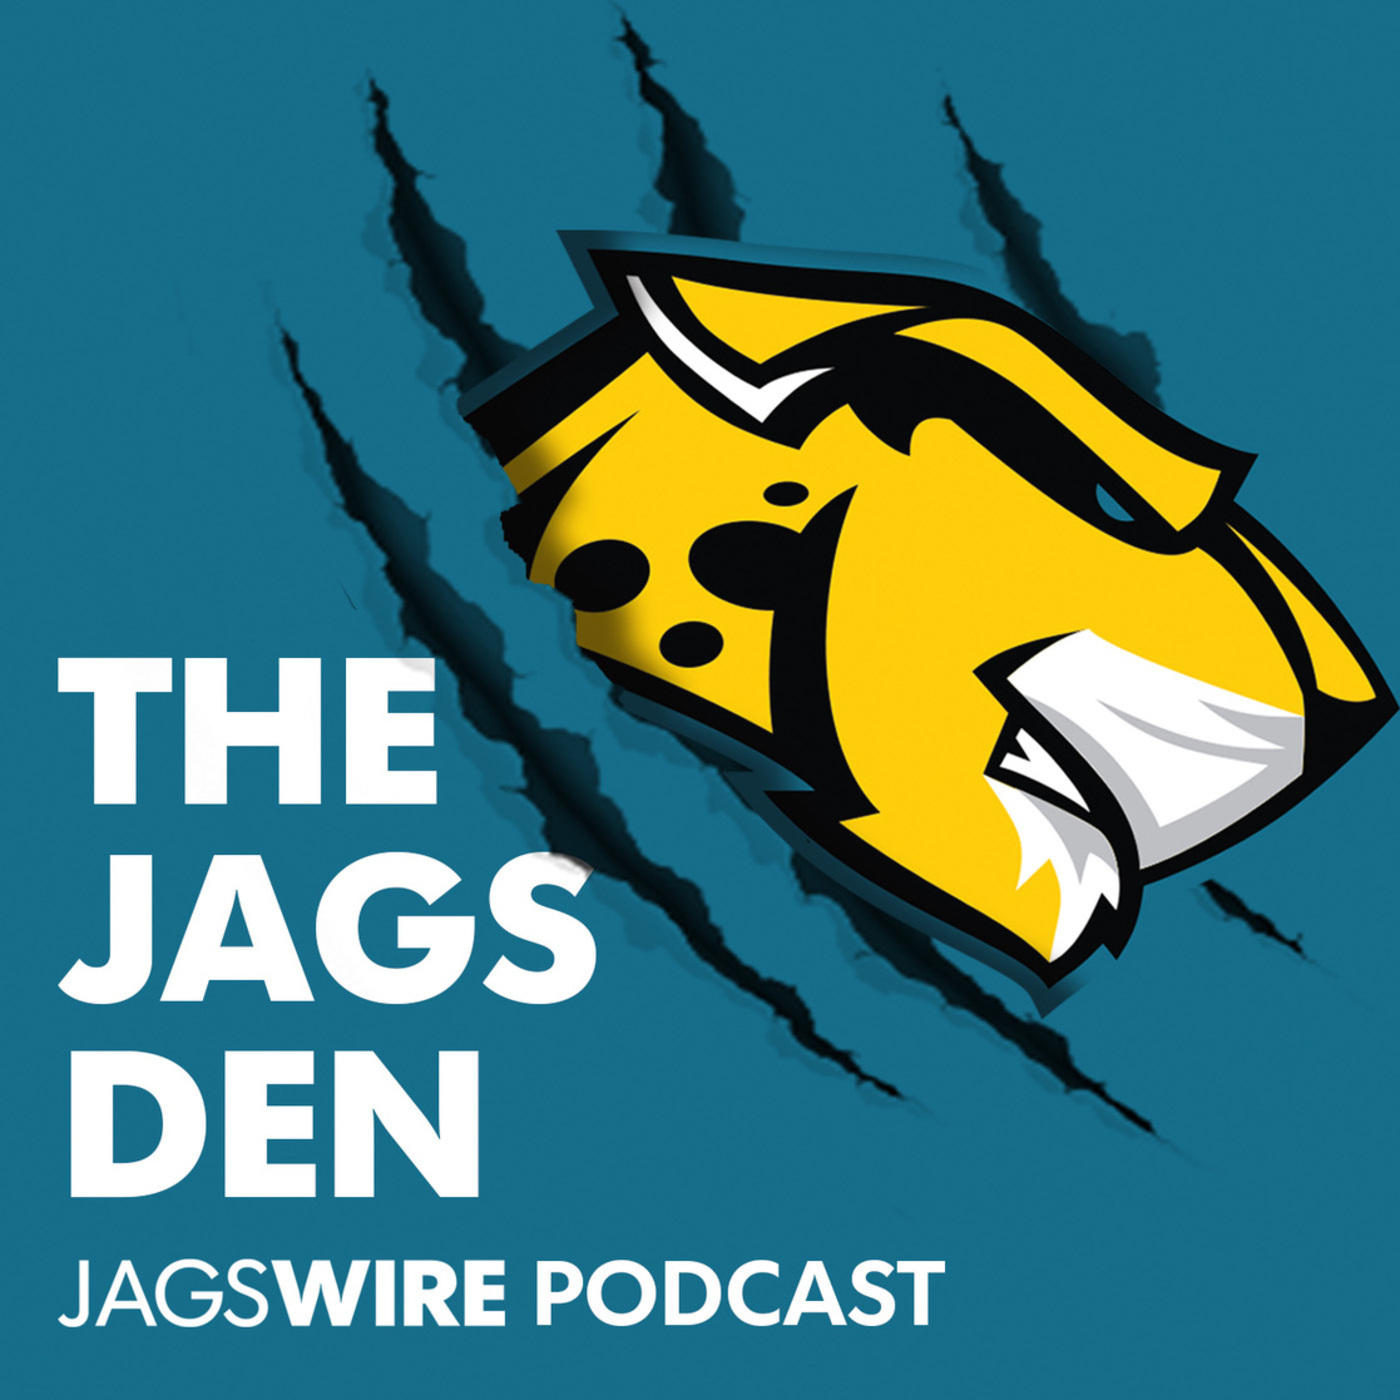 Jags Den Podcast Ep. 31: Discussion on Jags closing the Blake Bortles era, Colts victory and TNF outlook vs. Titans